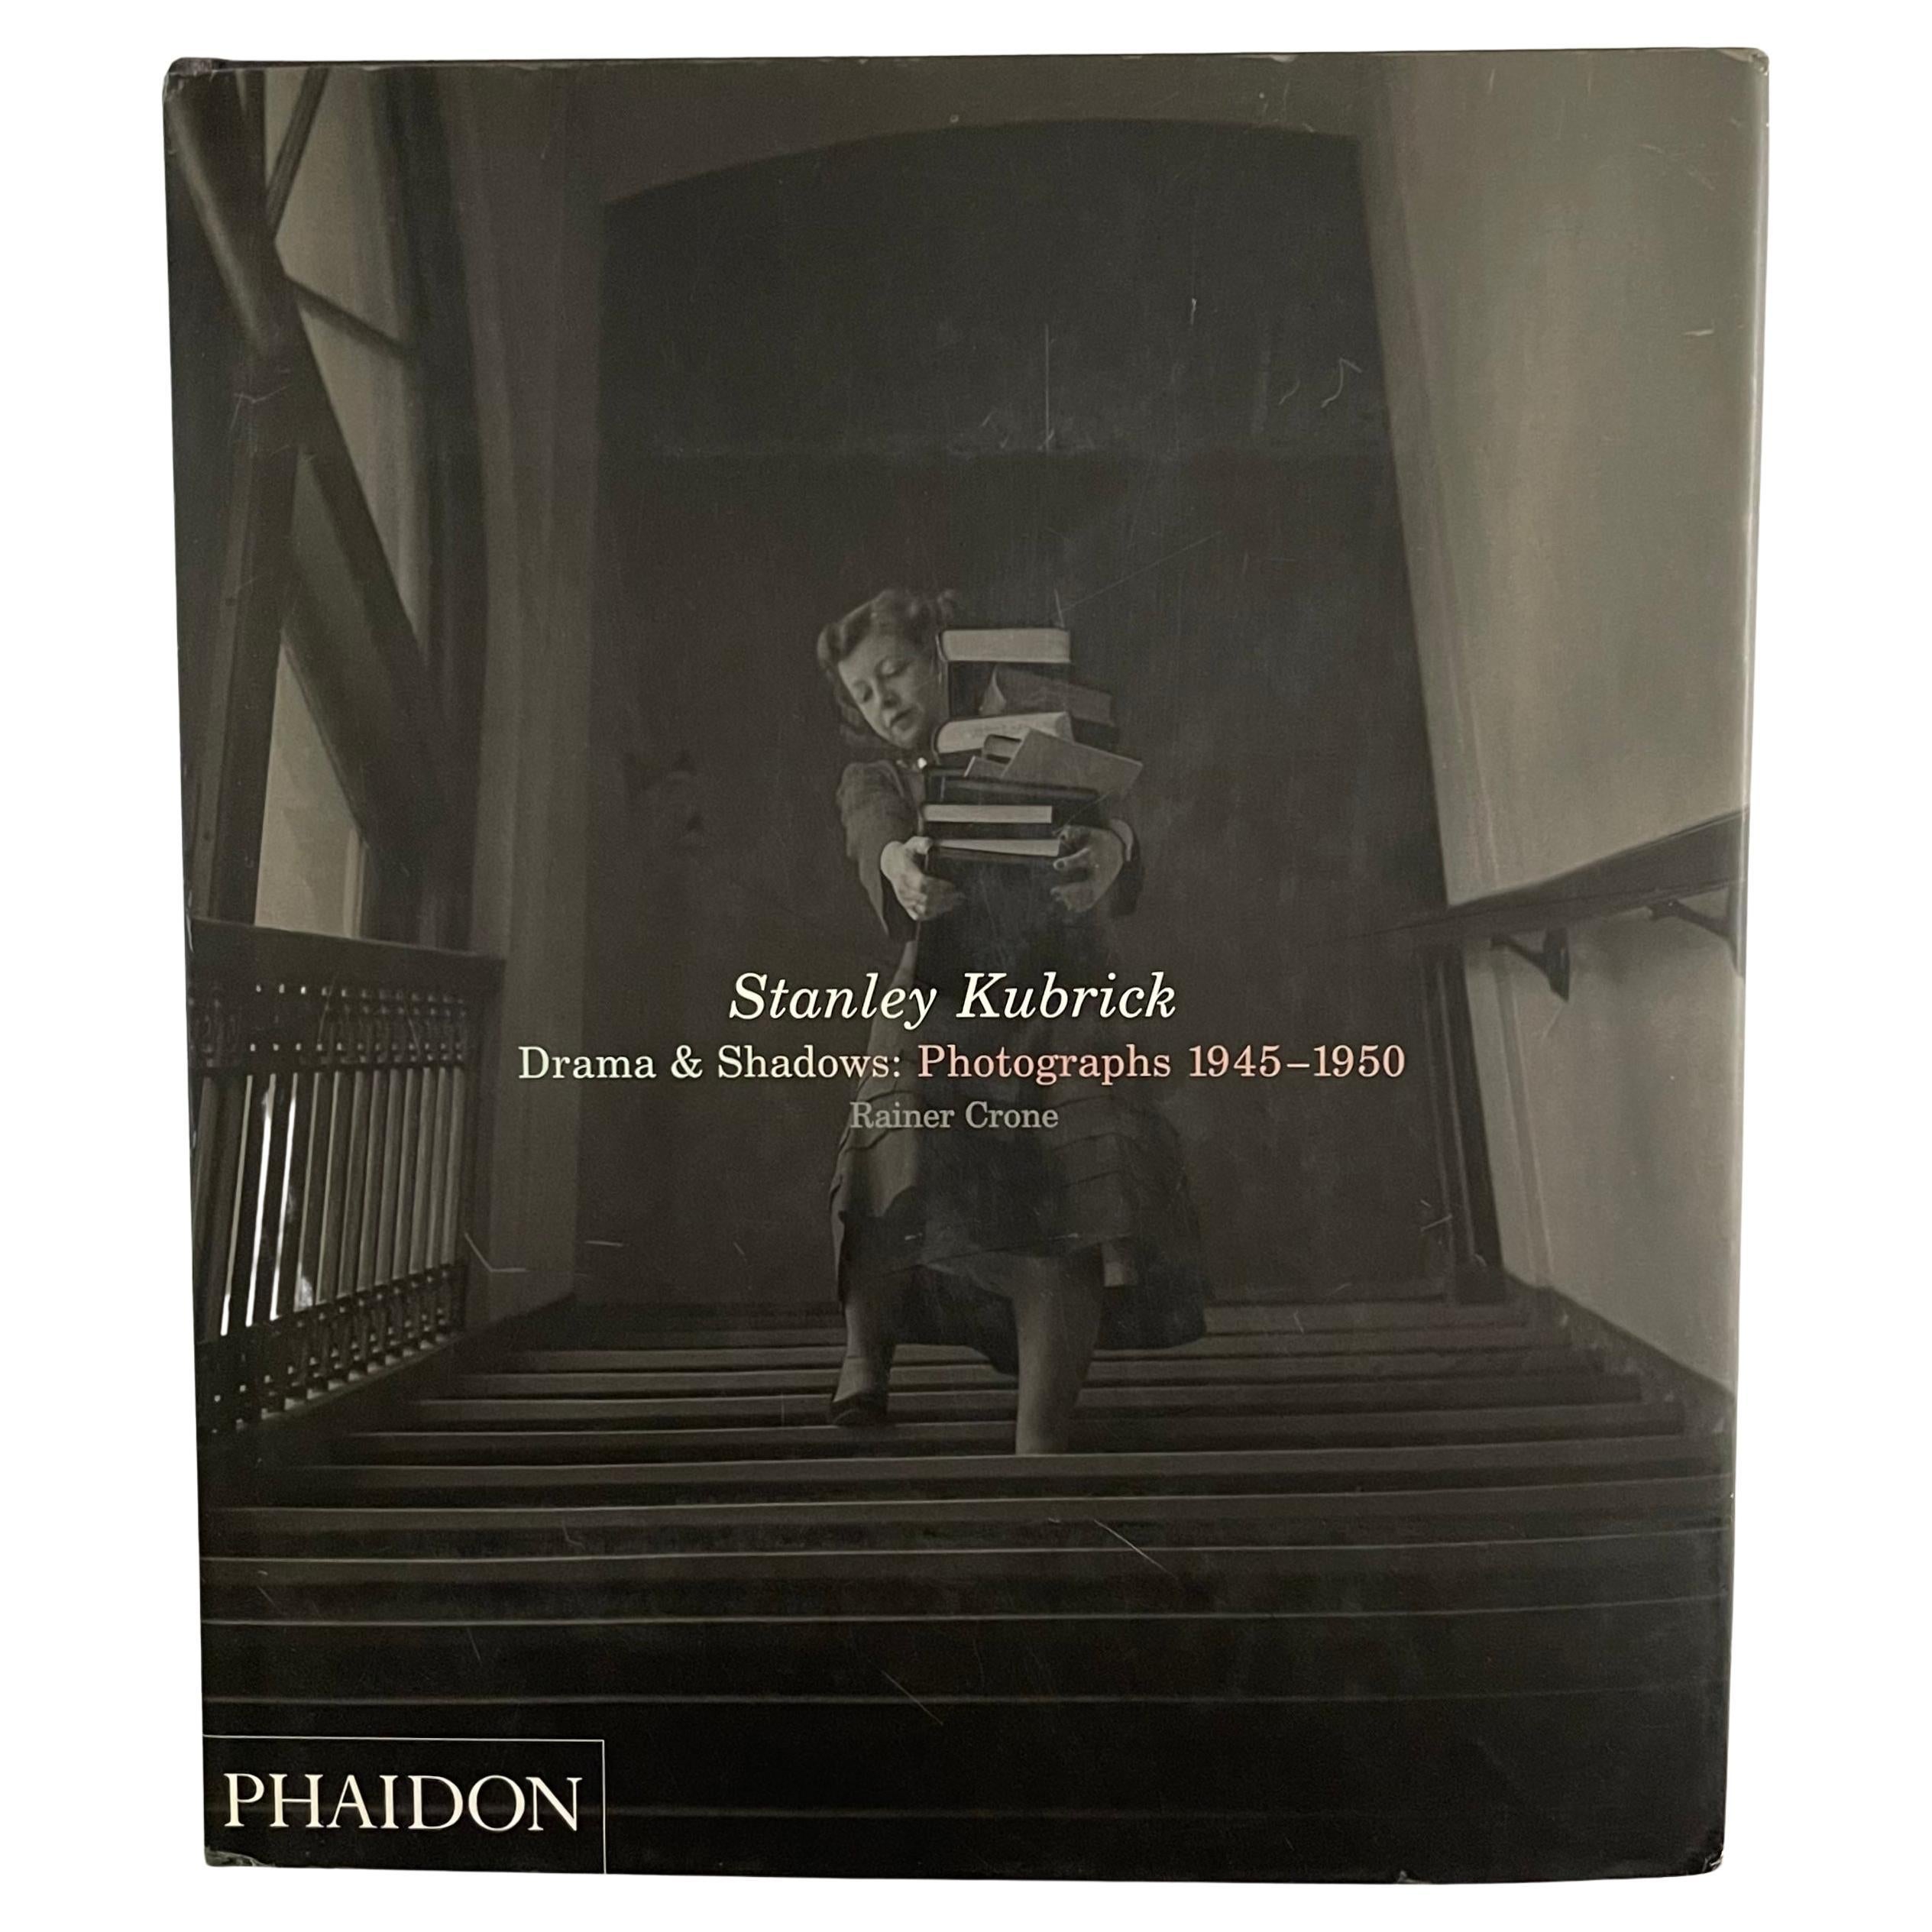 Stanley Kubrick, Drama & Shadows: Photographs 1st Edition For Sale